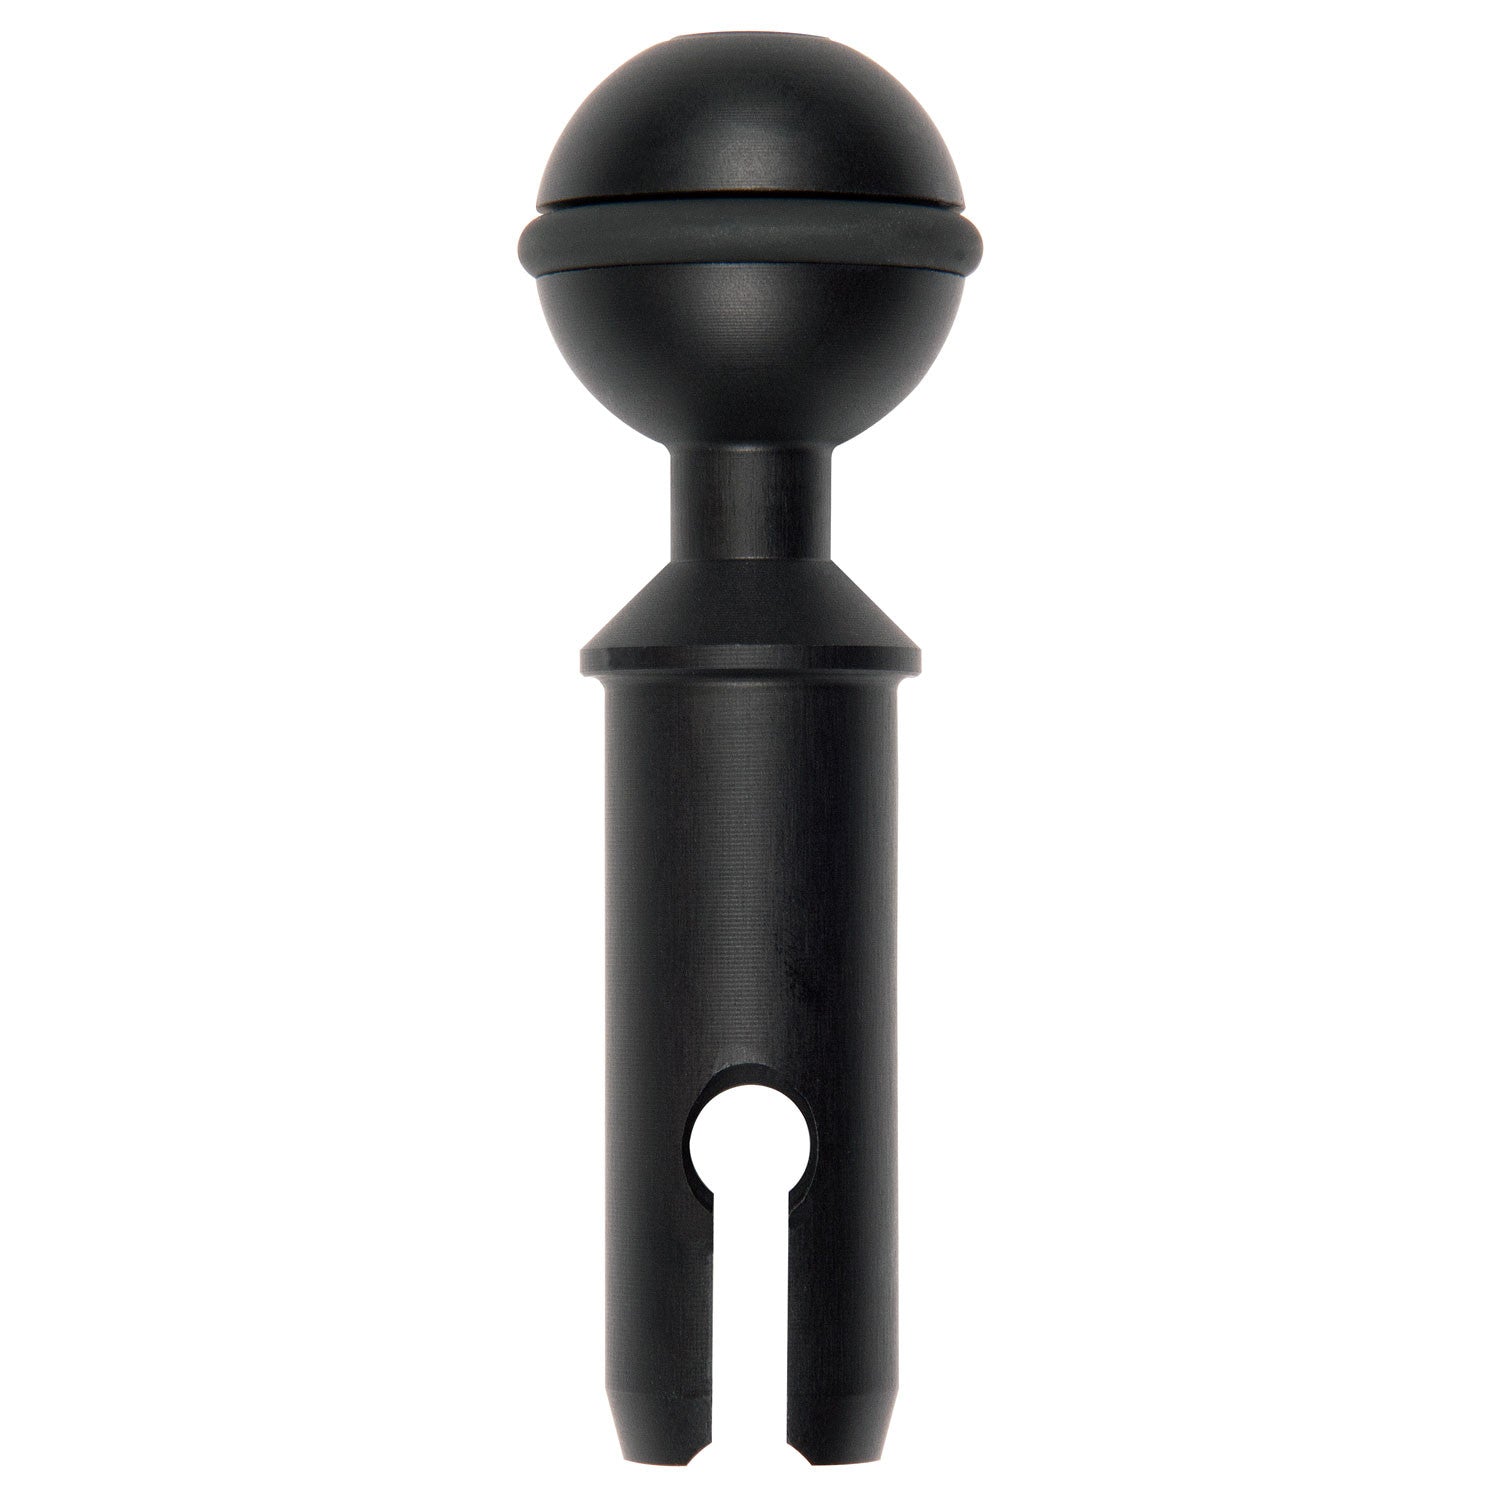 1-inch Ball Mount for Quick Release Handle